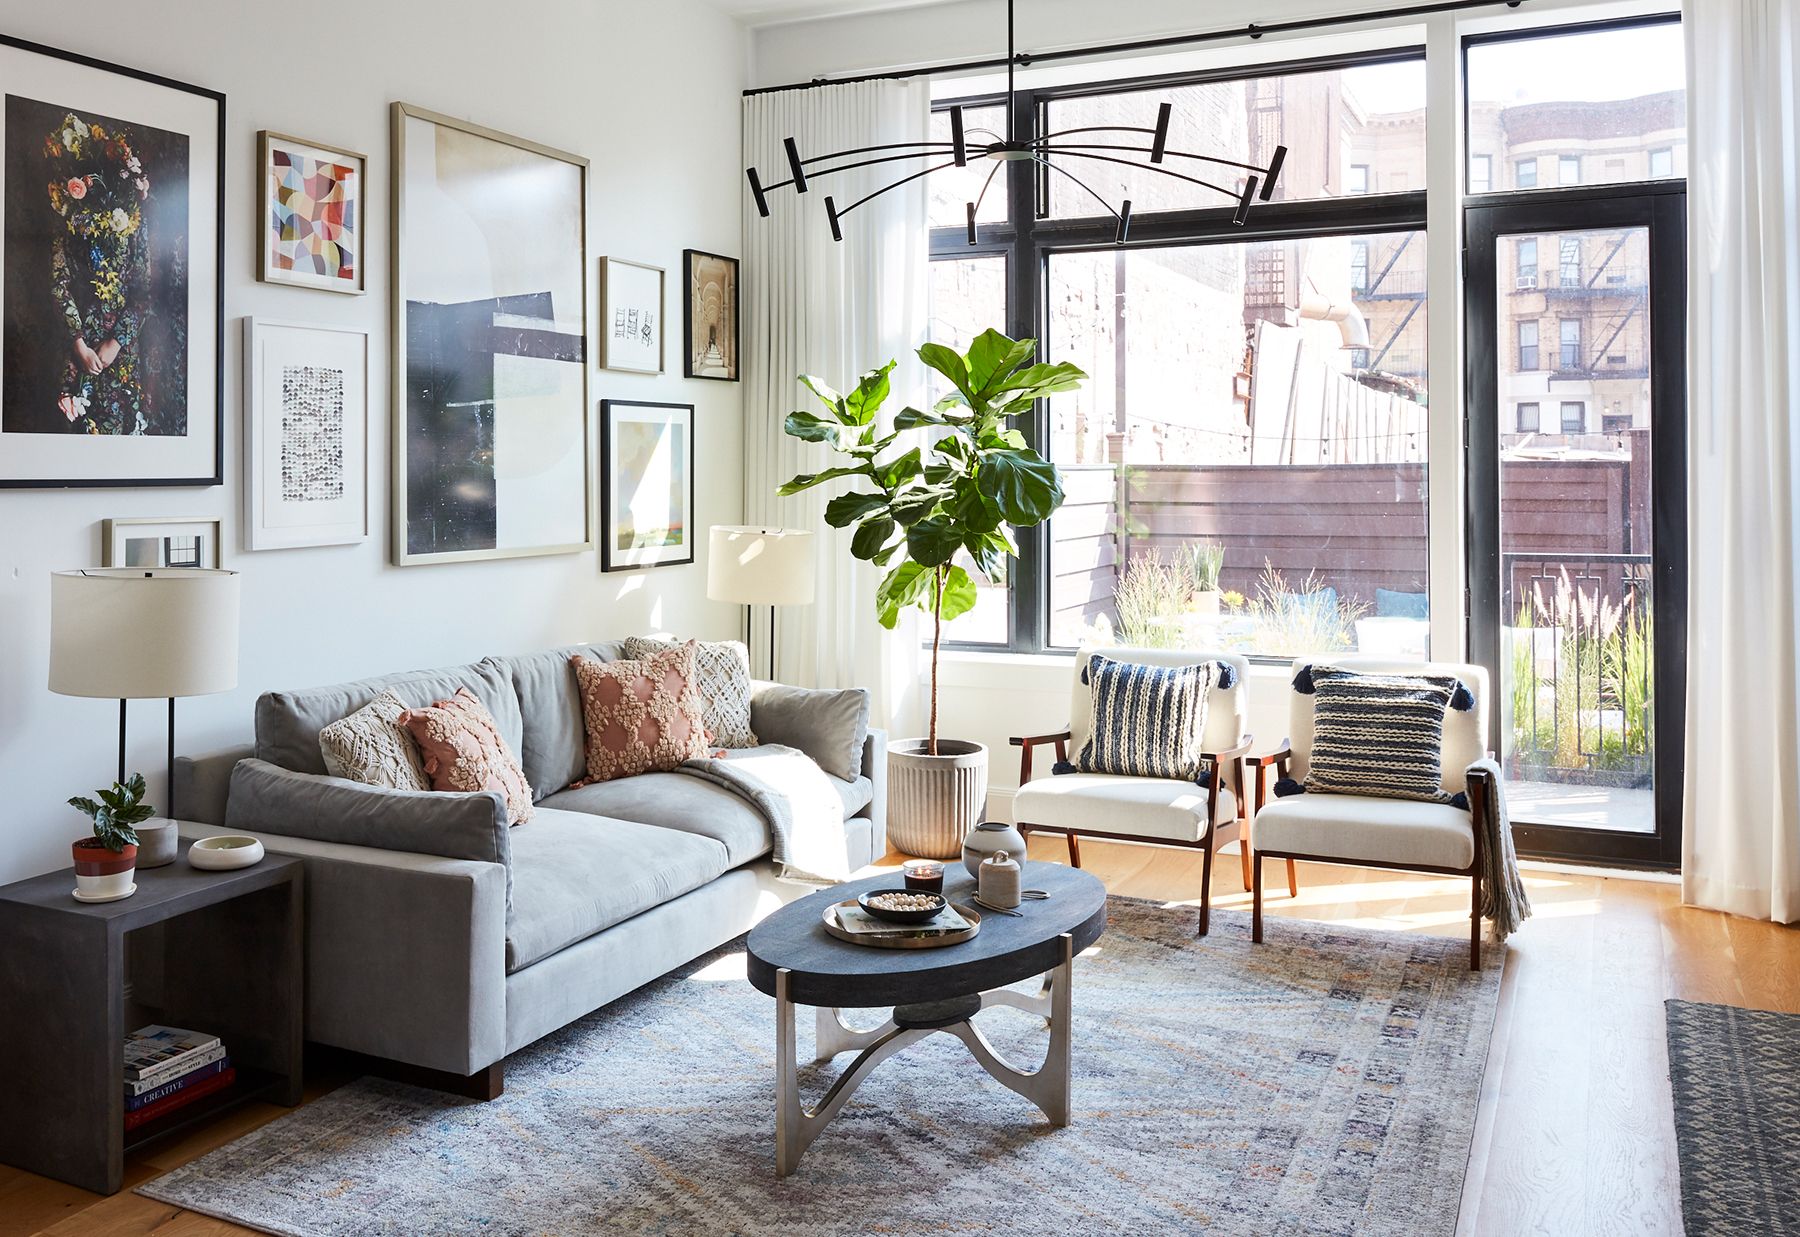 2019 Real Simple Home: Living Room